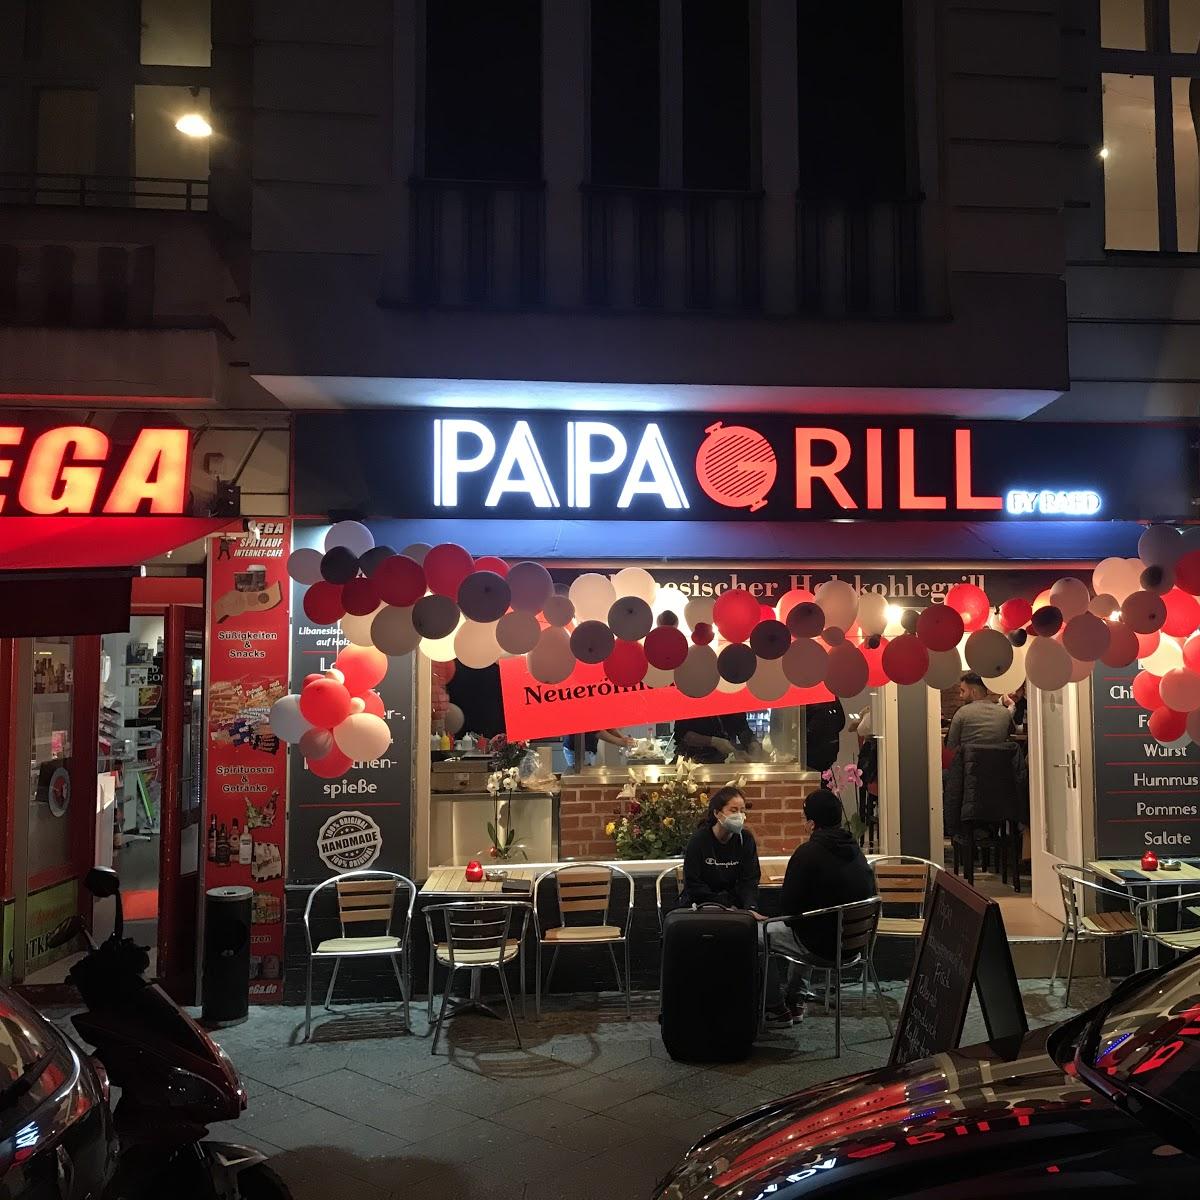 Restaurant "Papa Grill by RAED" in Berlin